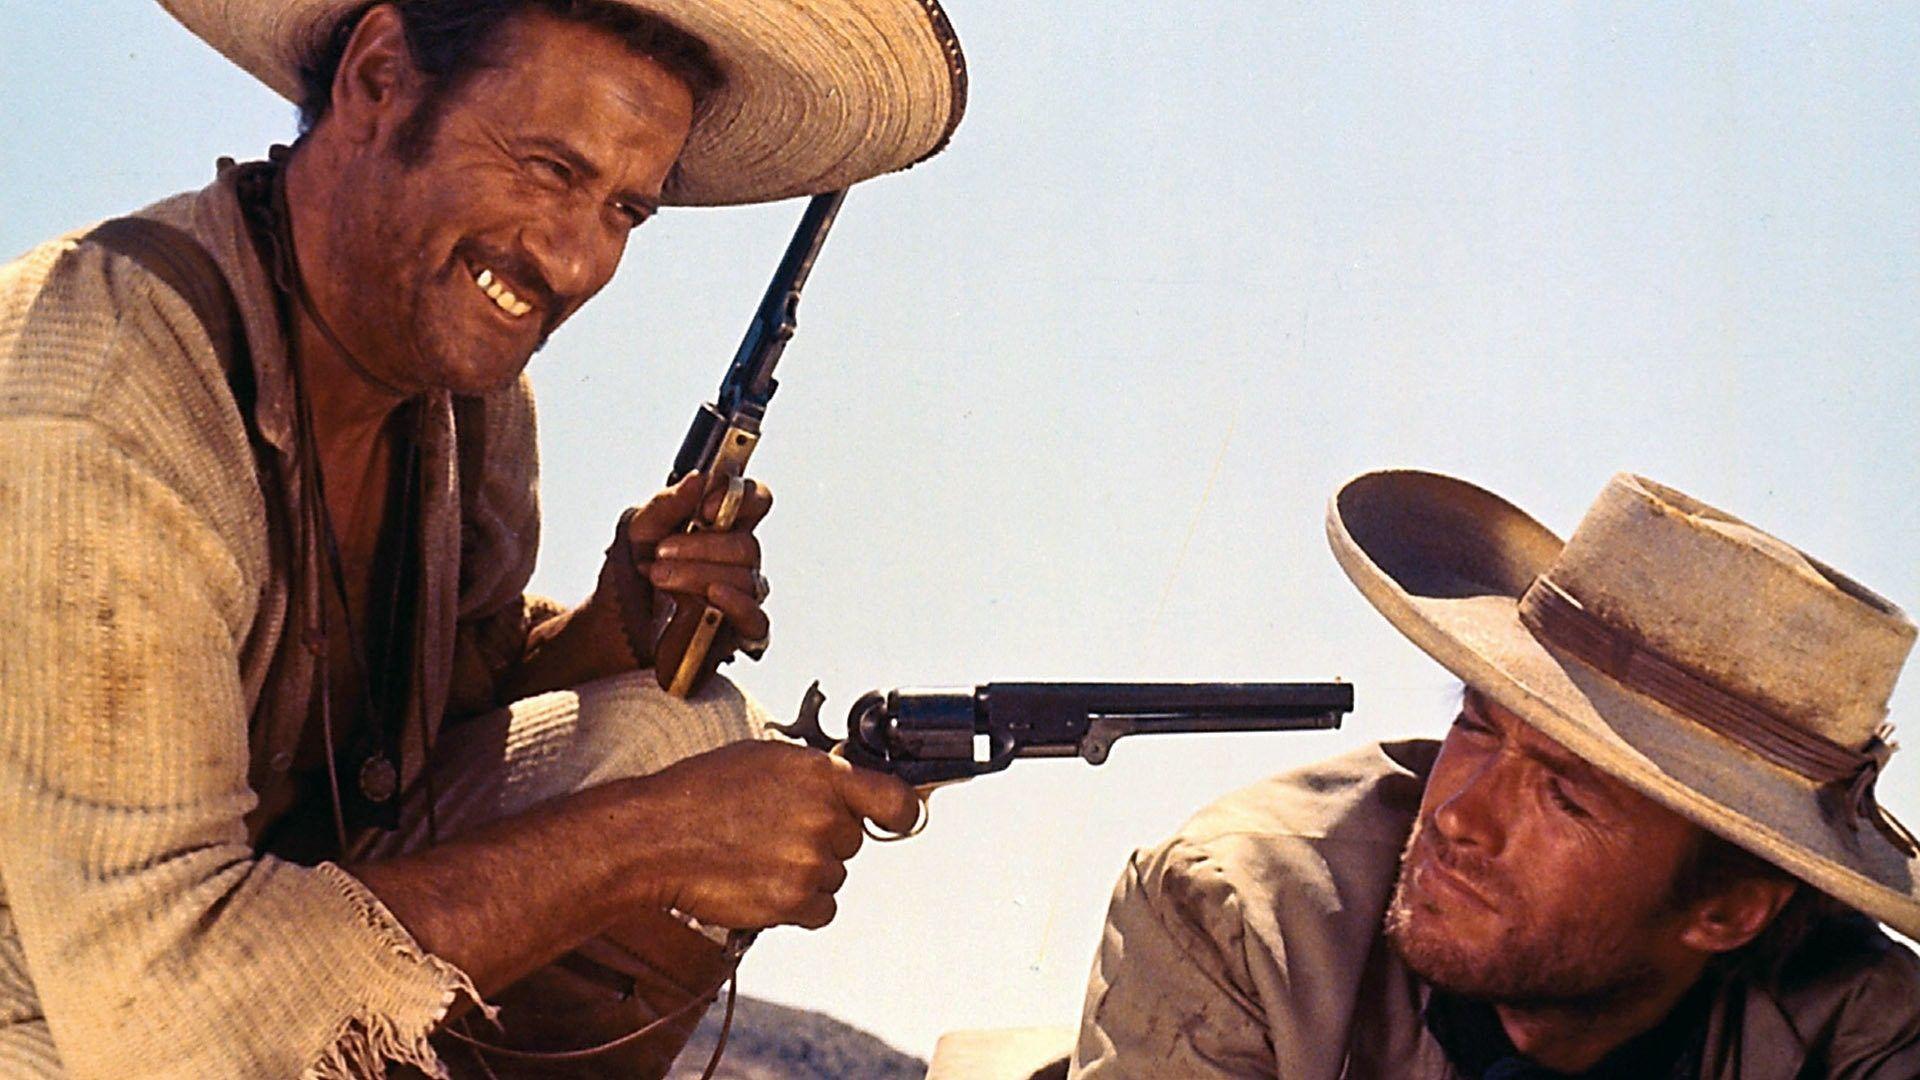 HD Wallpaper of Movie The Good, The Bad And The Ugly